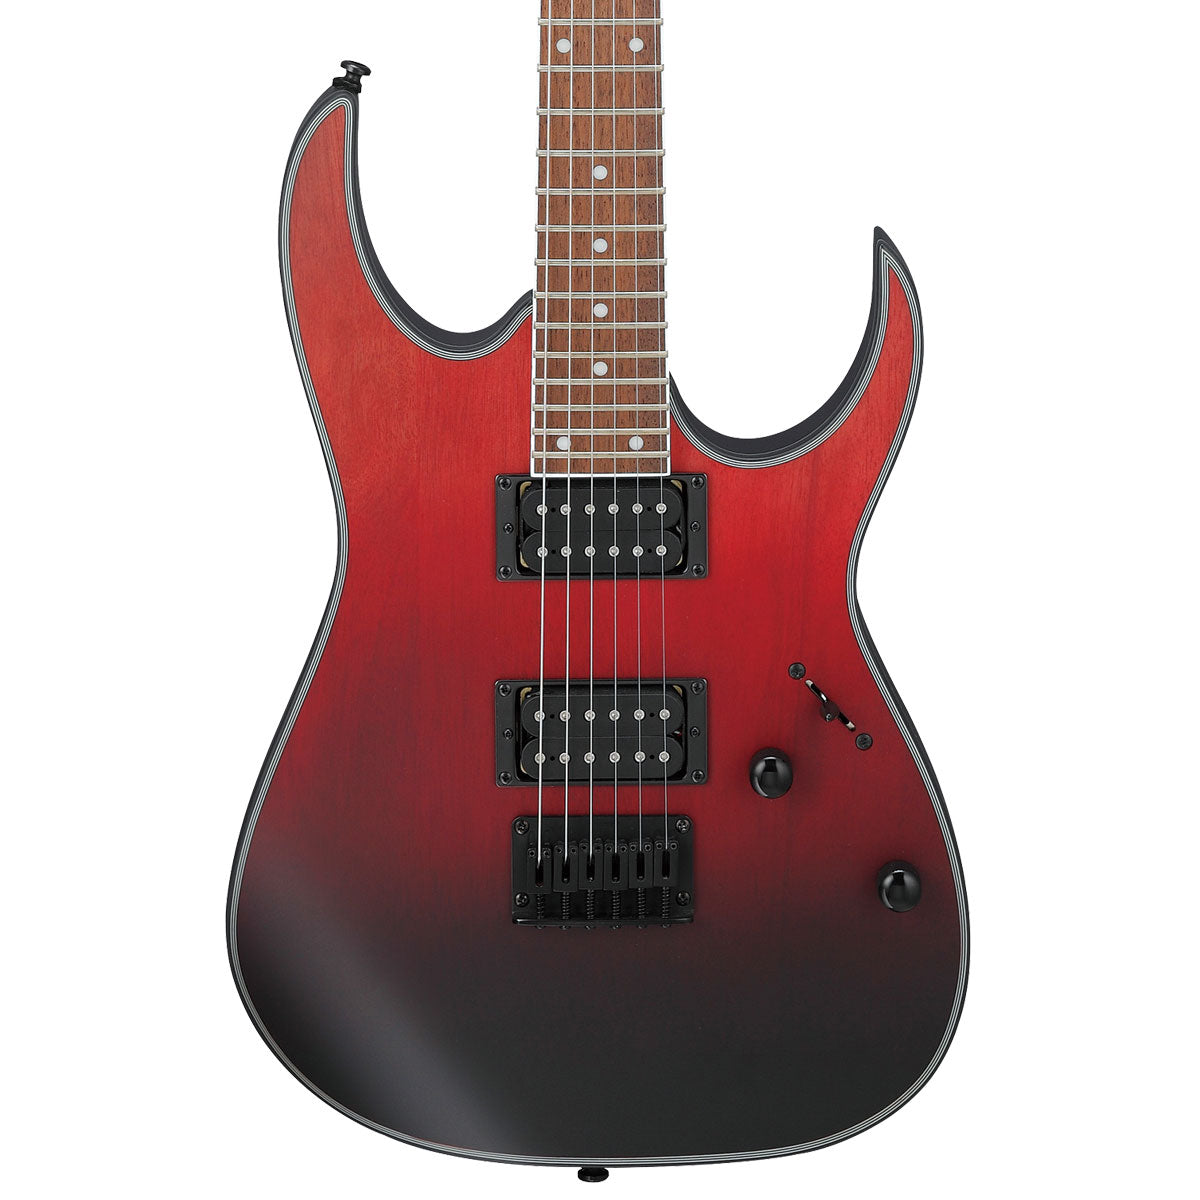 Close-up top view of Ibanez RG421EX Electric Guitar - Crimson Fade showing body and portion of fingerboard